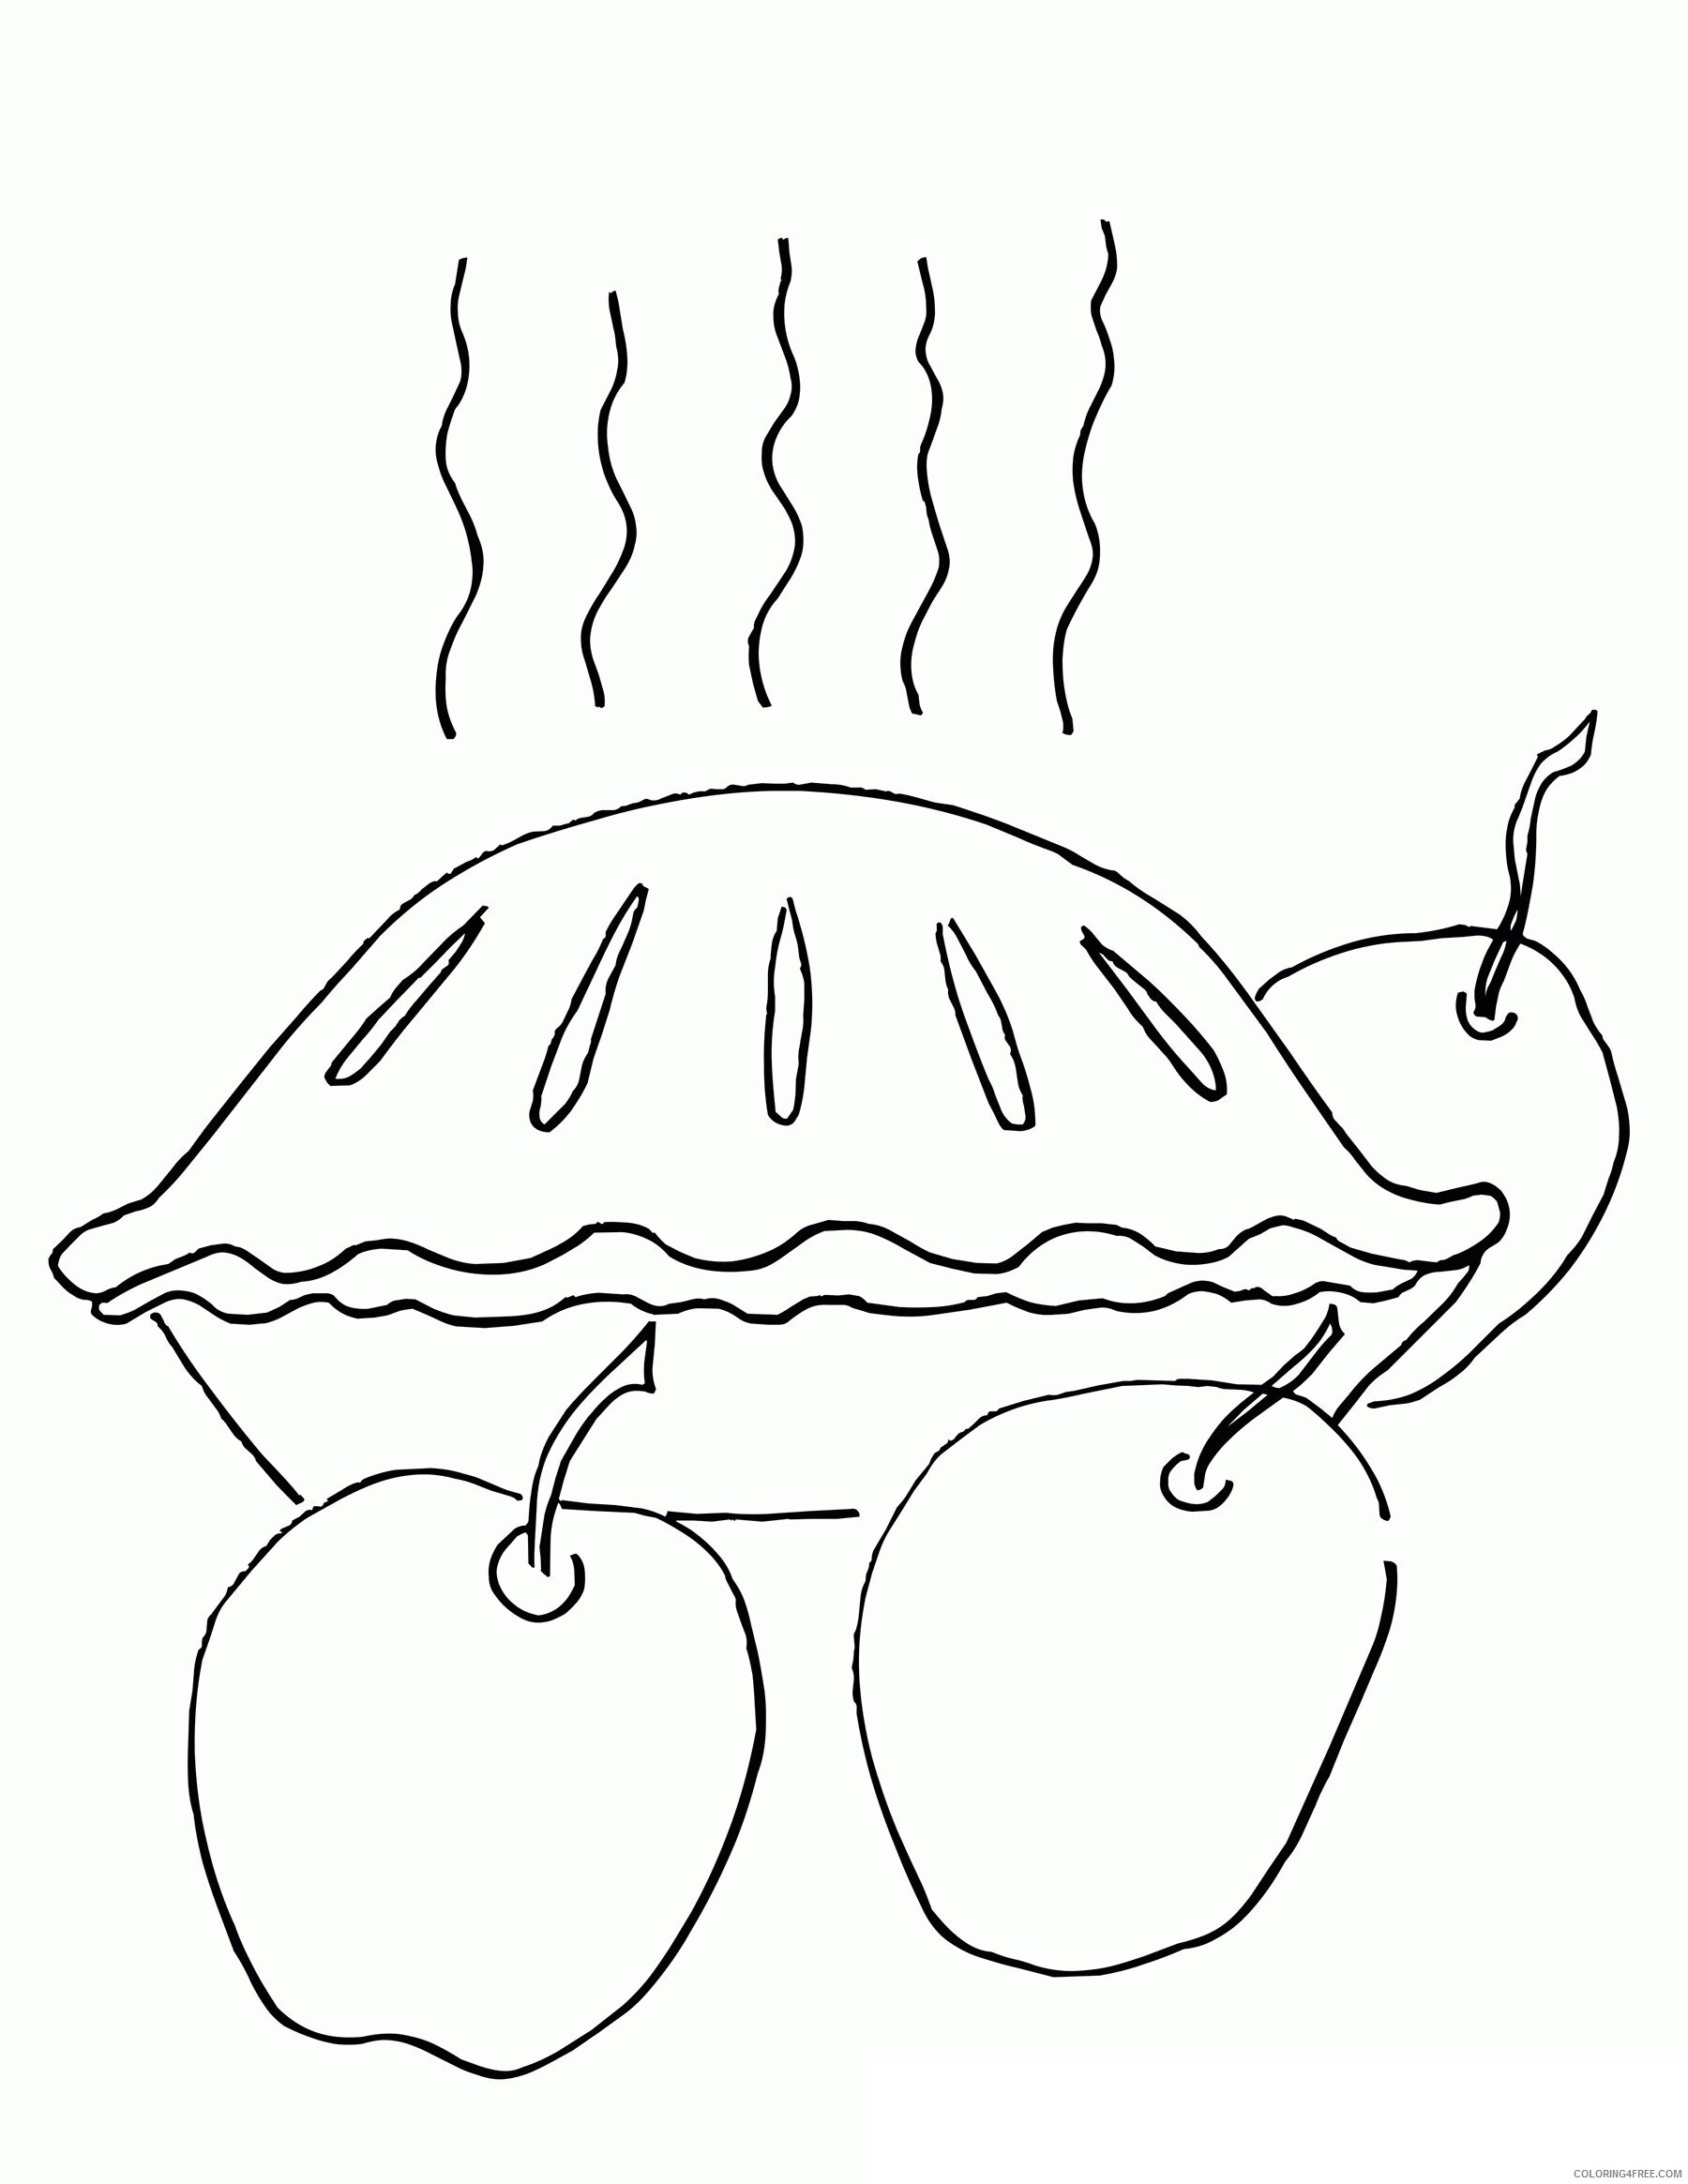 Apple Pie Coloring Page Printable Sheets Apple Pie Sheet Create 2021 a 2005 Coloring4free